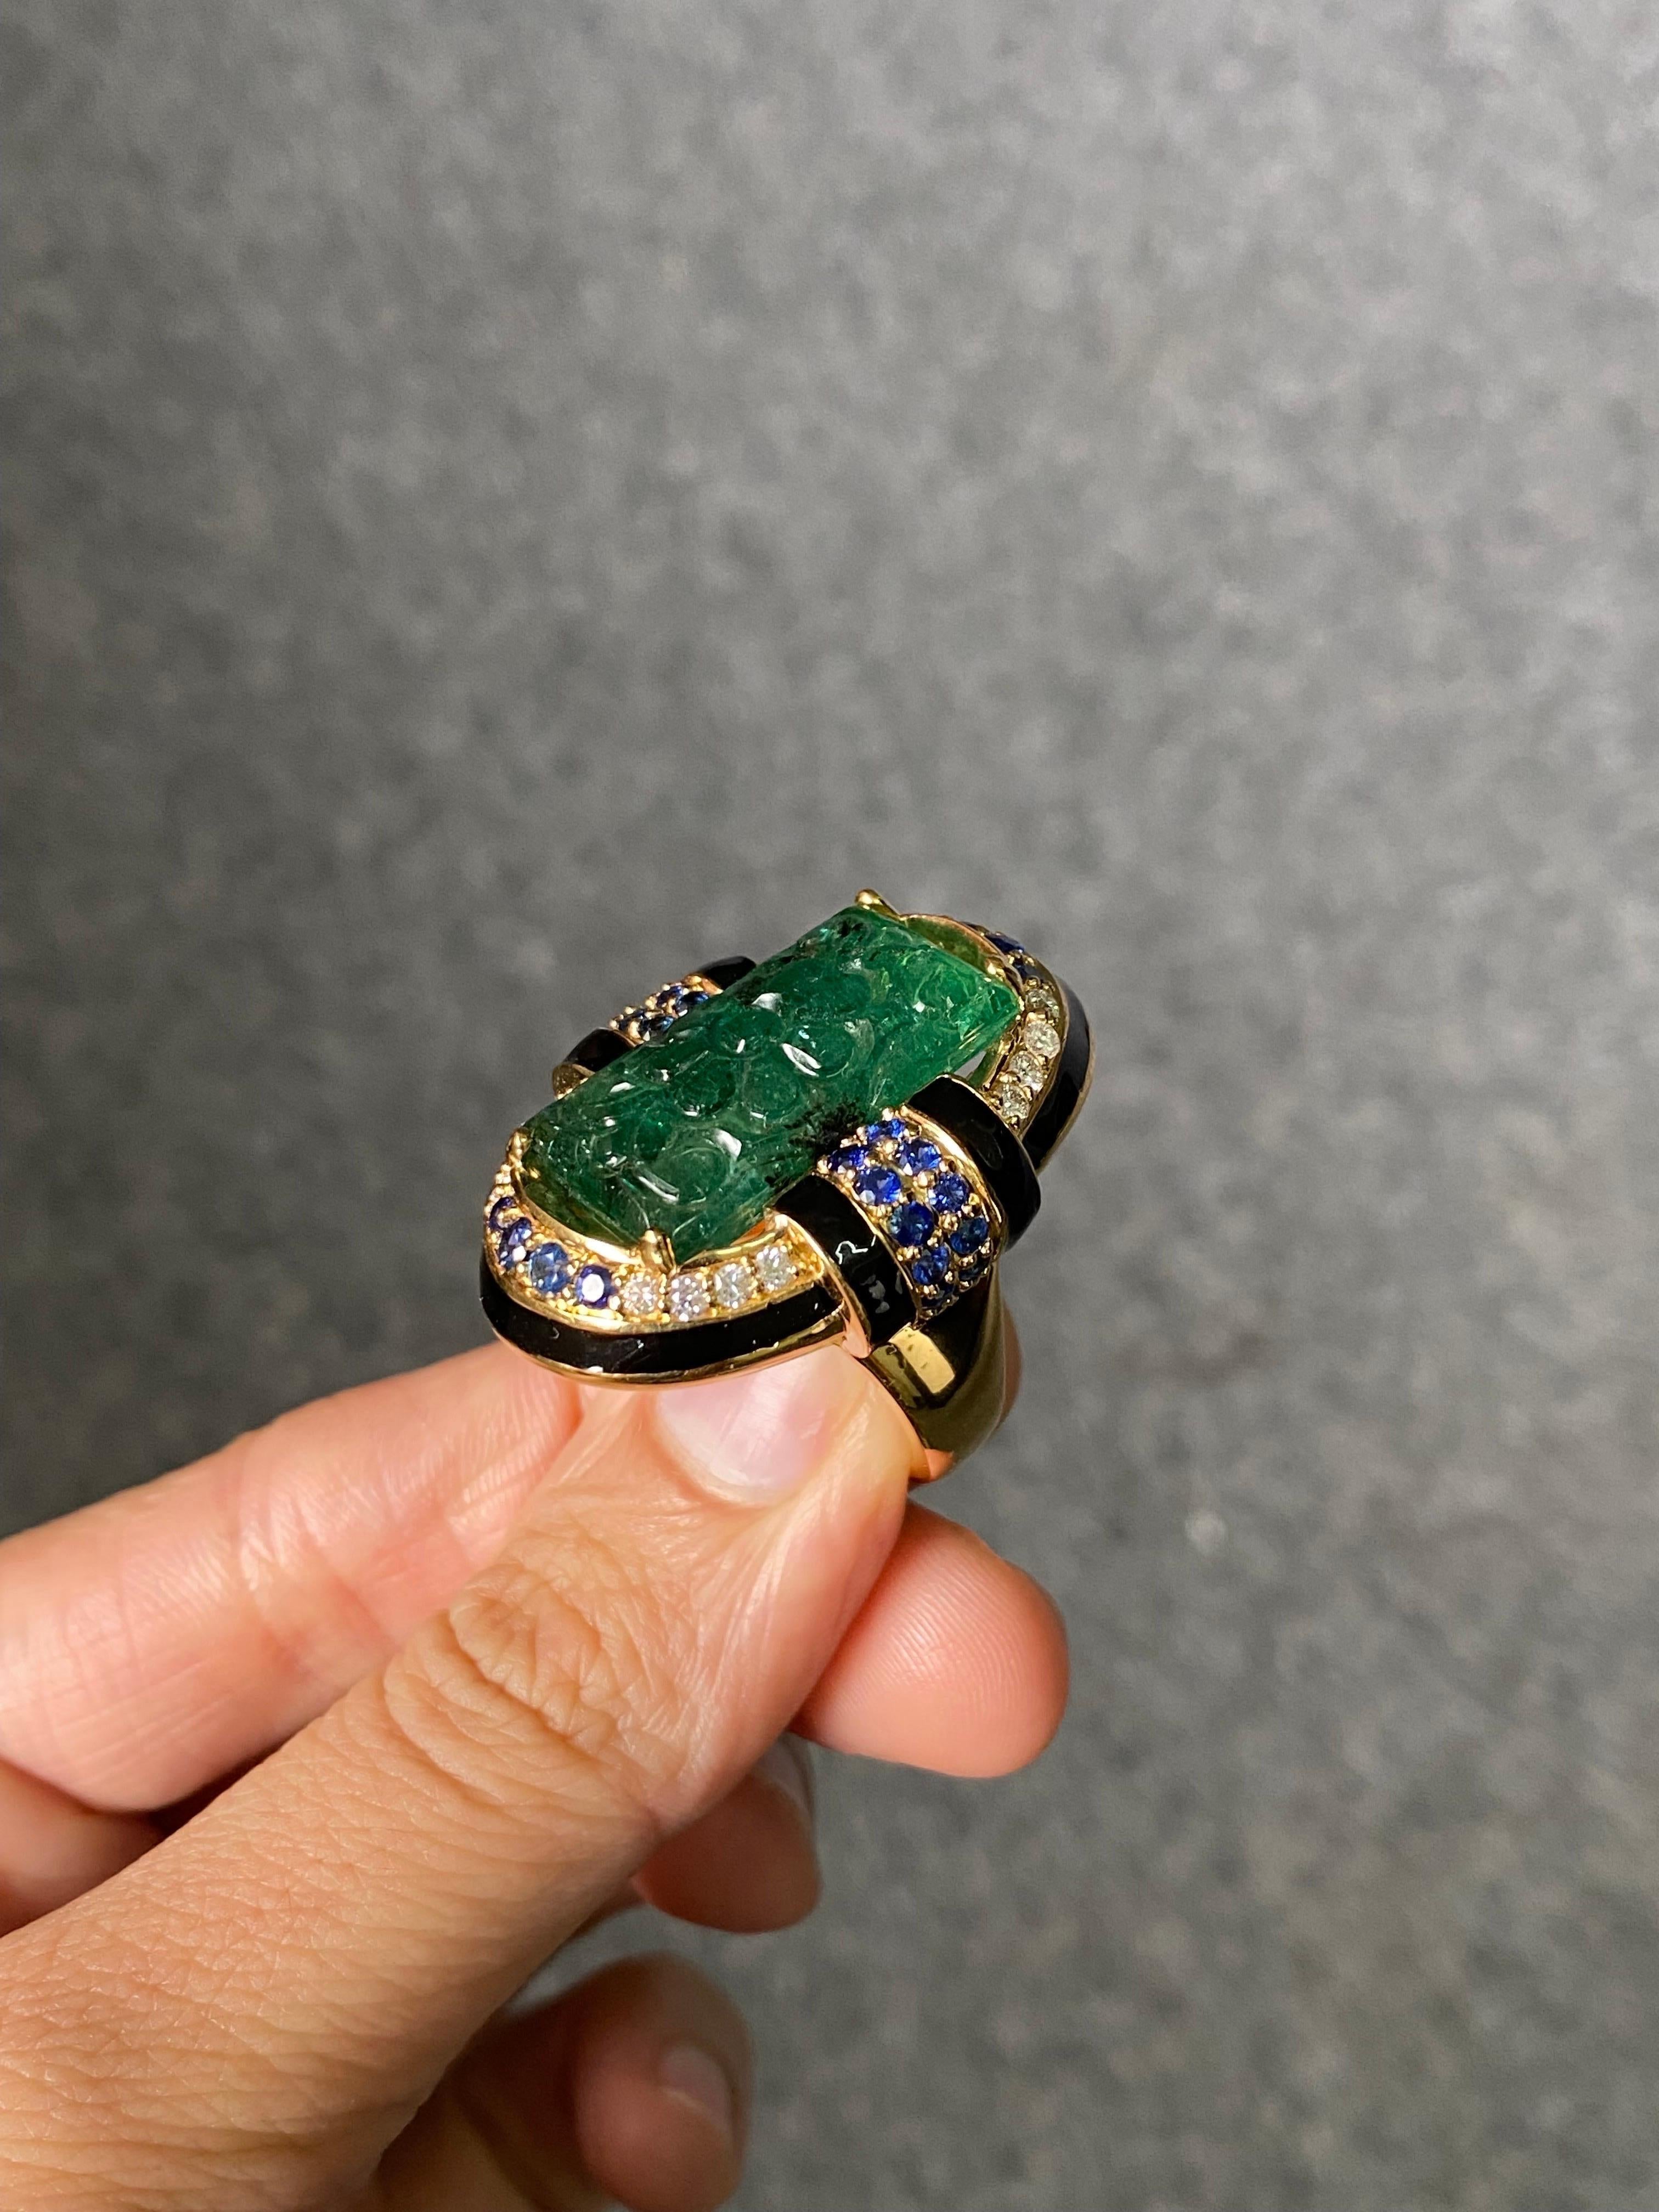 A beautiful art-deco inspired cocktail ring, with a 18.20 carat natural carved, vivid green Zambian Emerald, Blue Sapphire and White Diamond. The gemstones are set in solid 18K Yellow Gold, and black enamel is used to create the unique art-deco